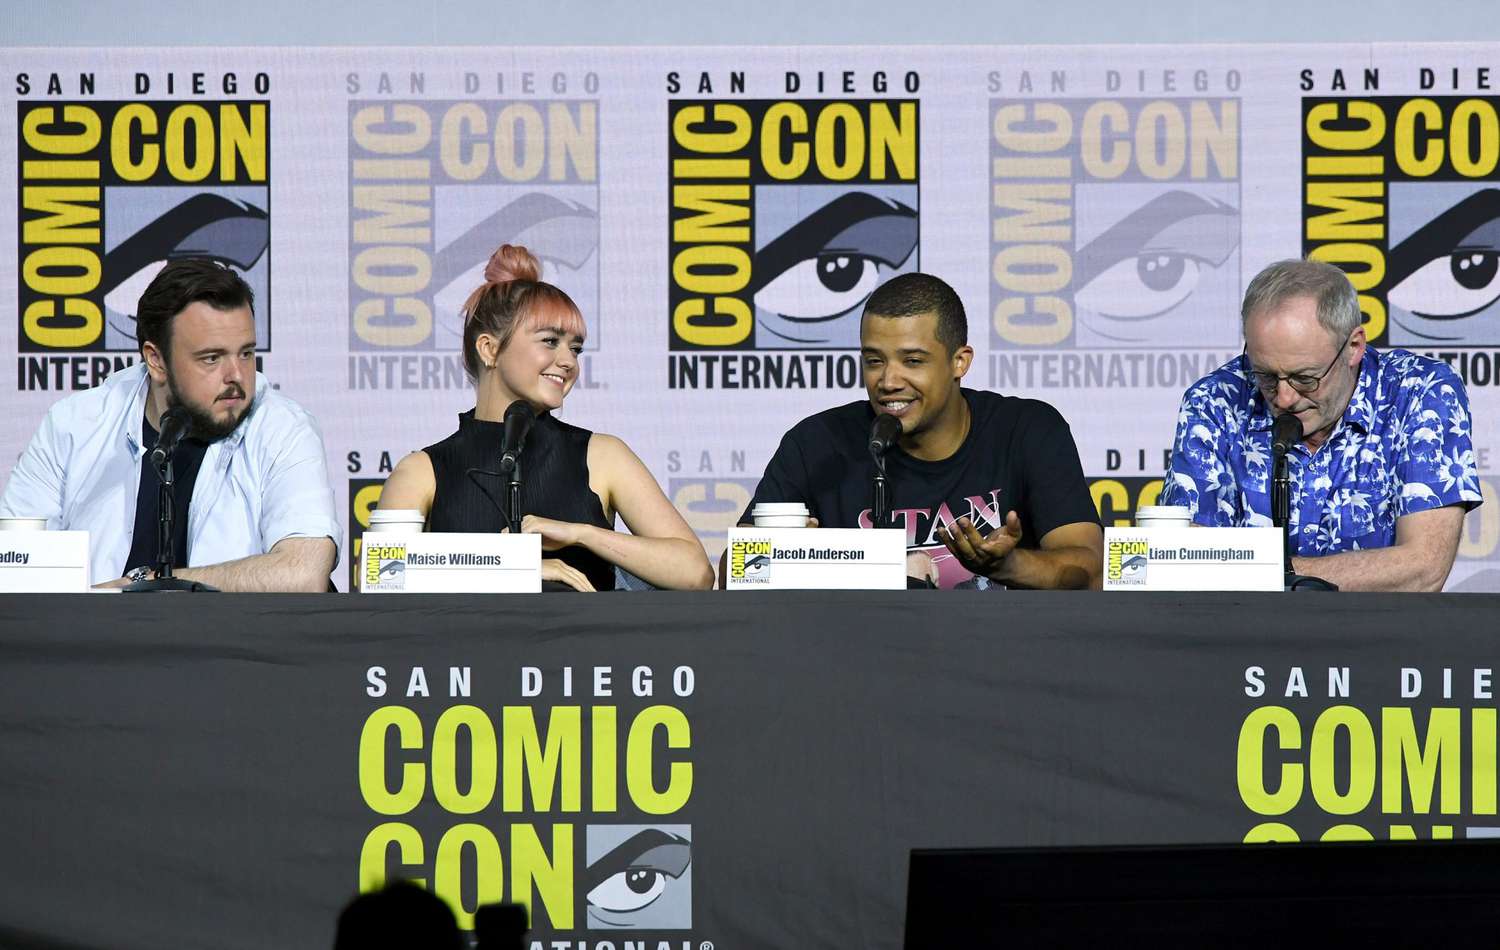 2019 Comic-Con International - "Game Of Thrones" Panel And Q&A